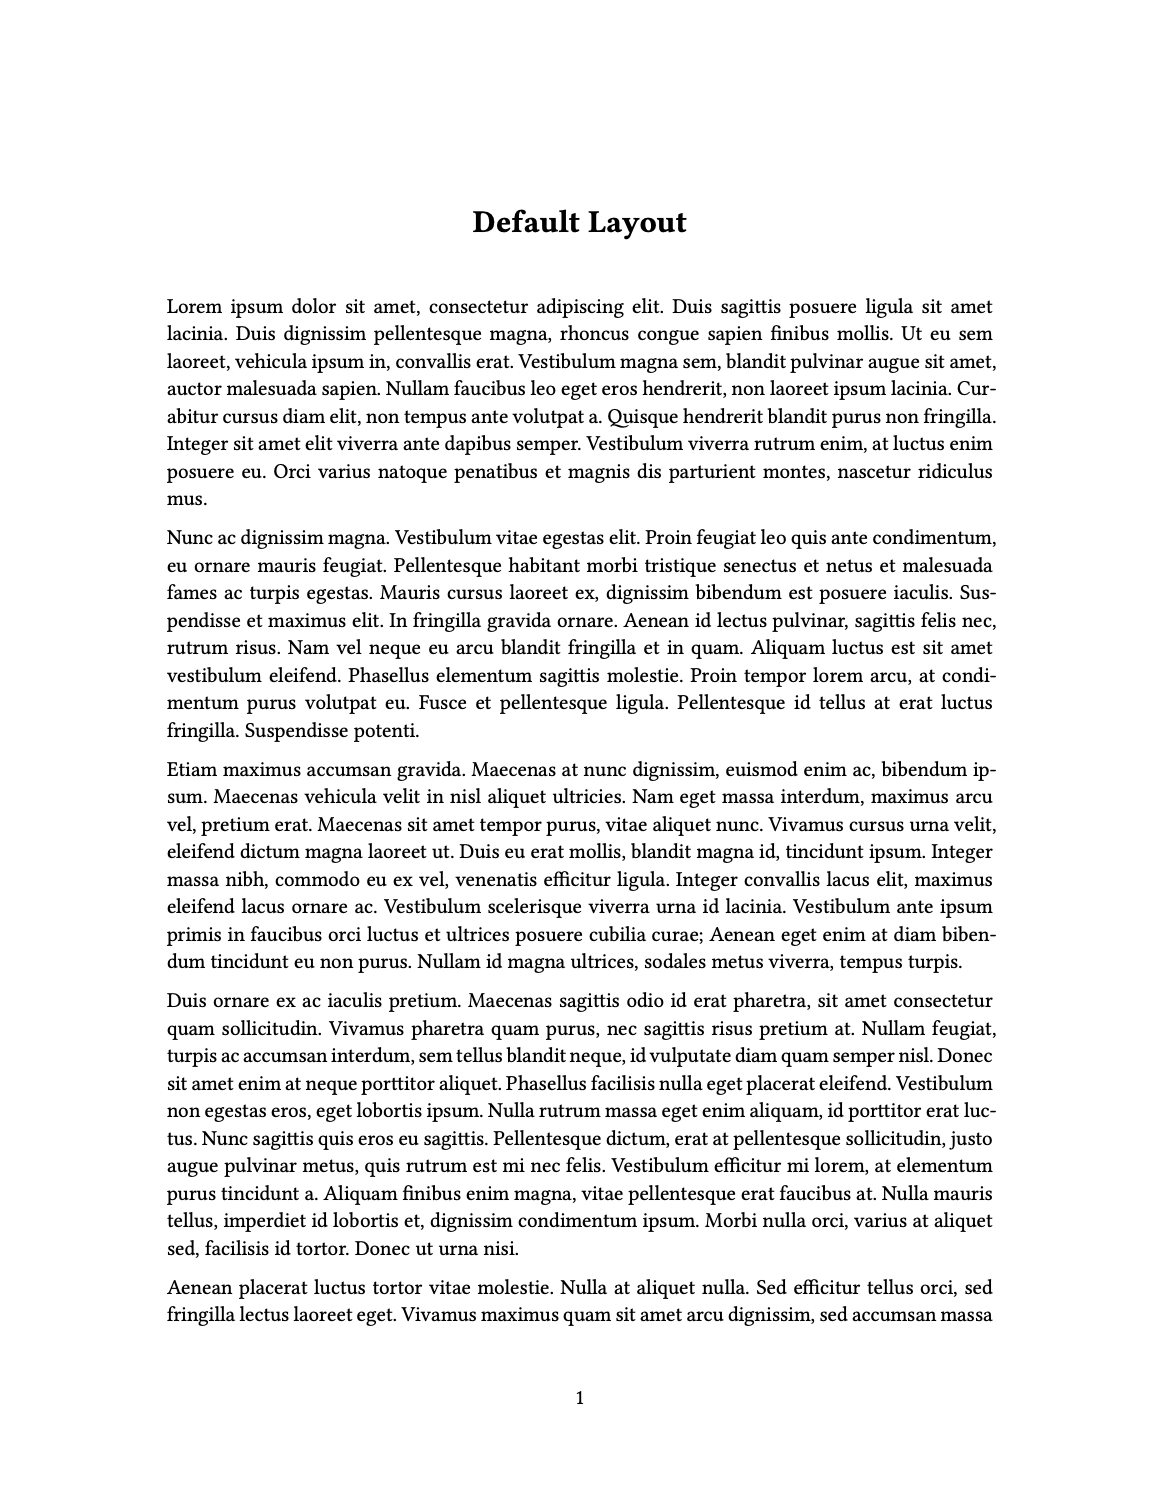 Screenshot of one page of PDF document. The document shows a single column of text.